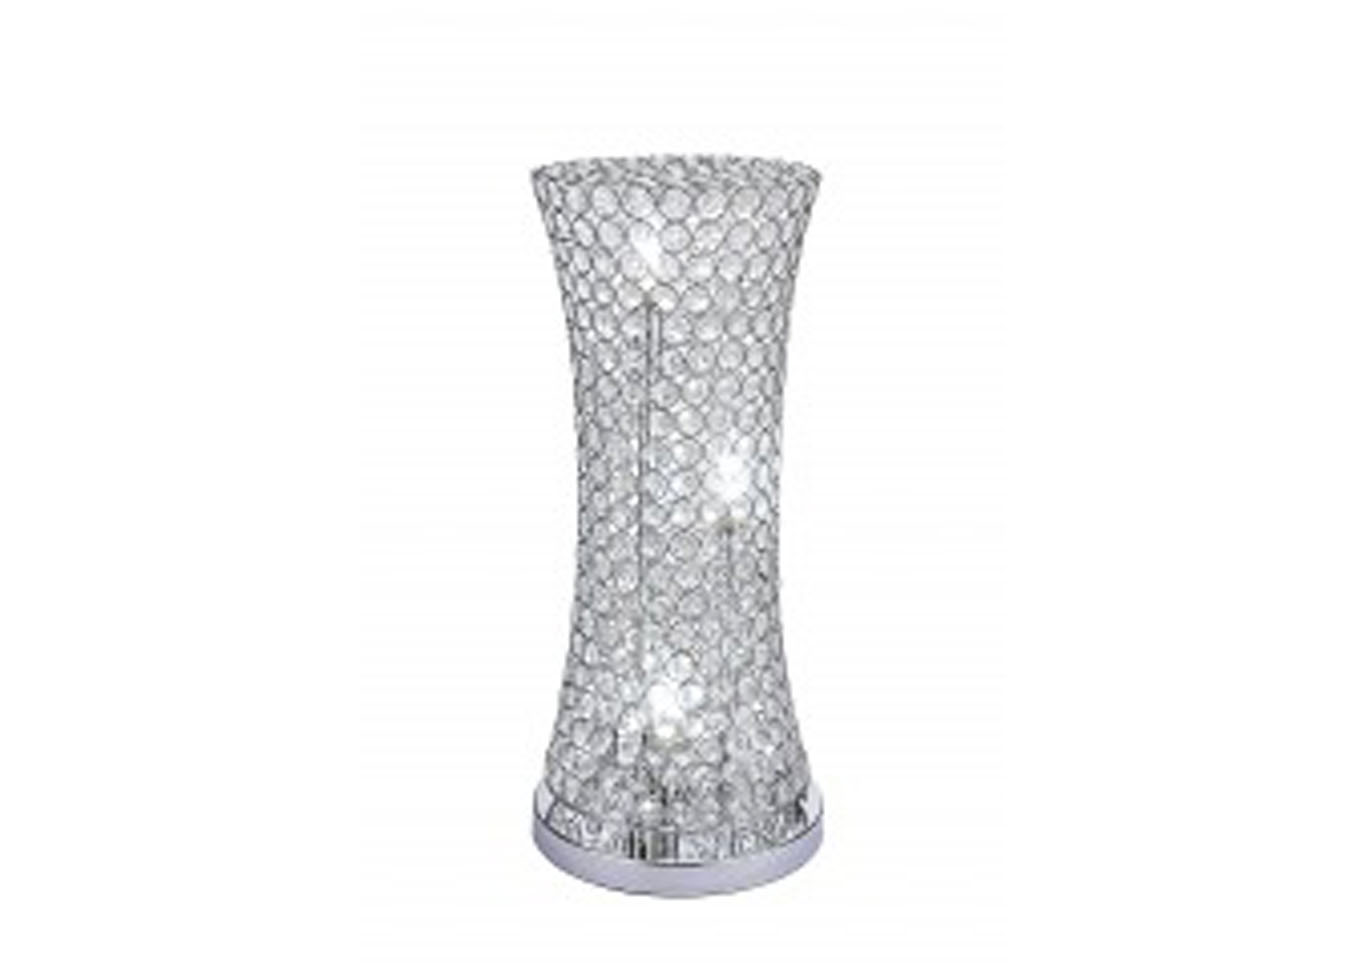 19"H LED TABLE LAMP,Instore